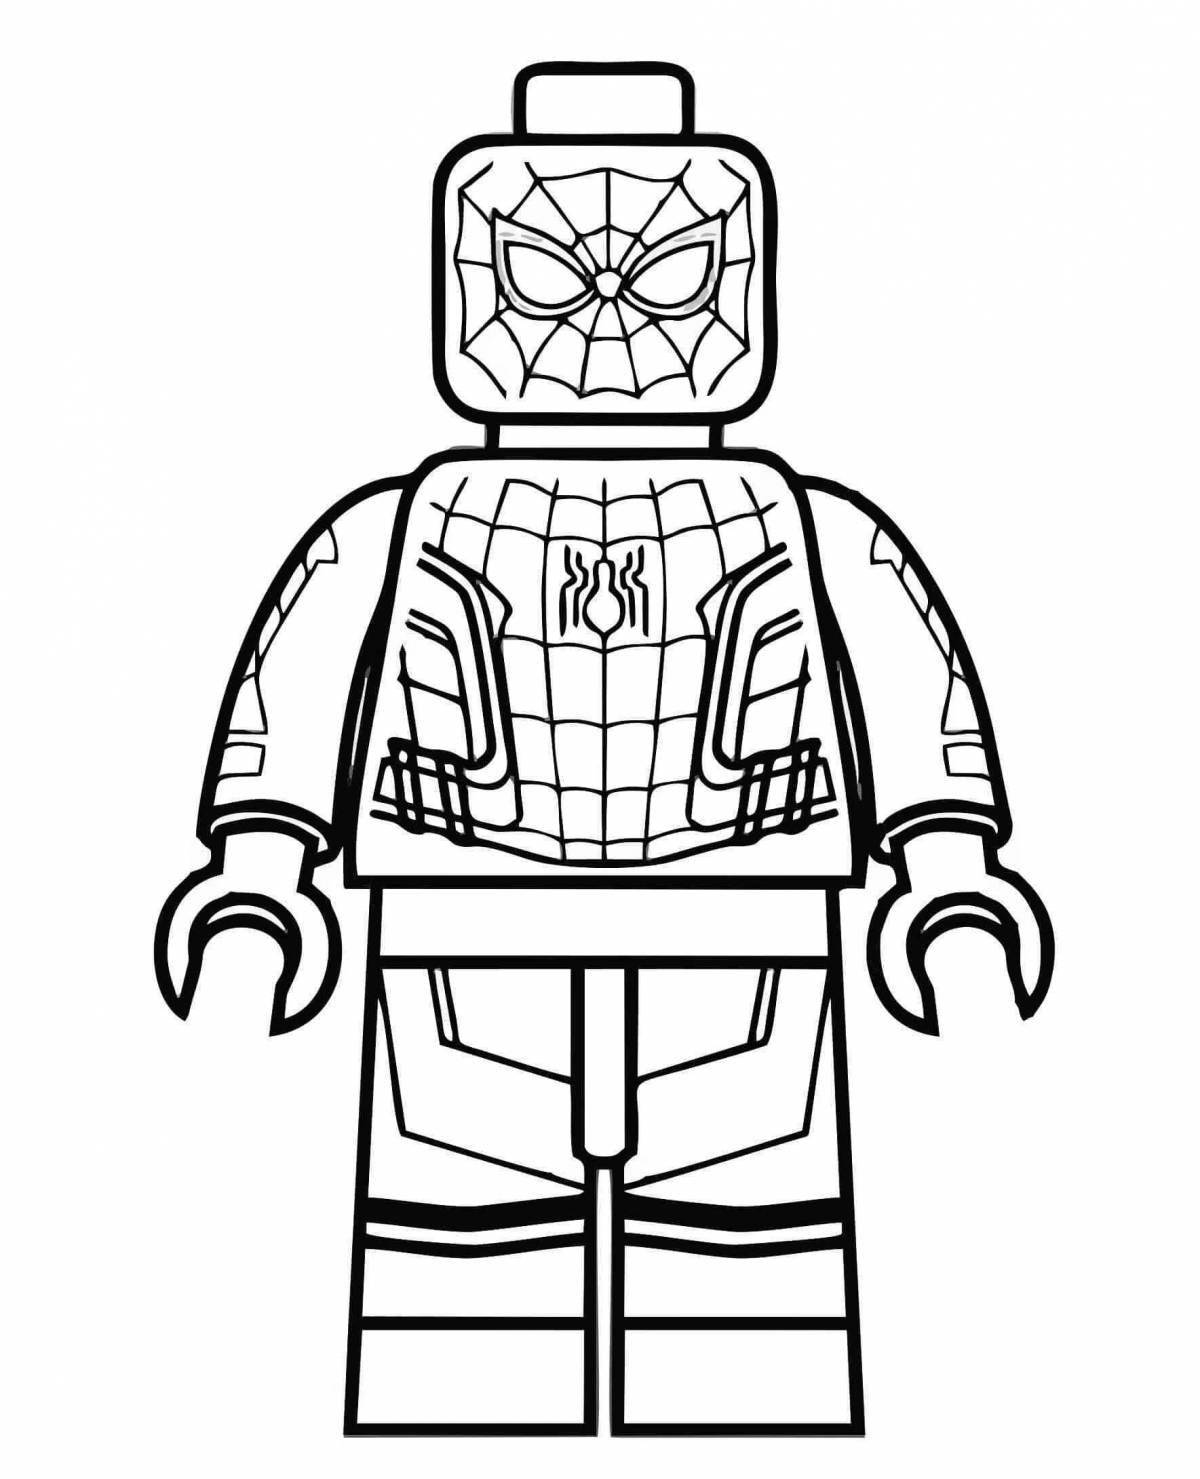 Fairy lego spiderman coloring page